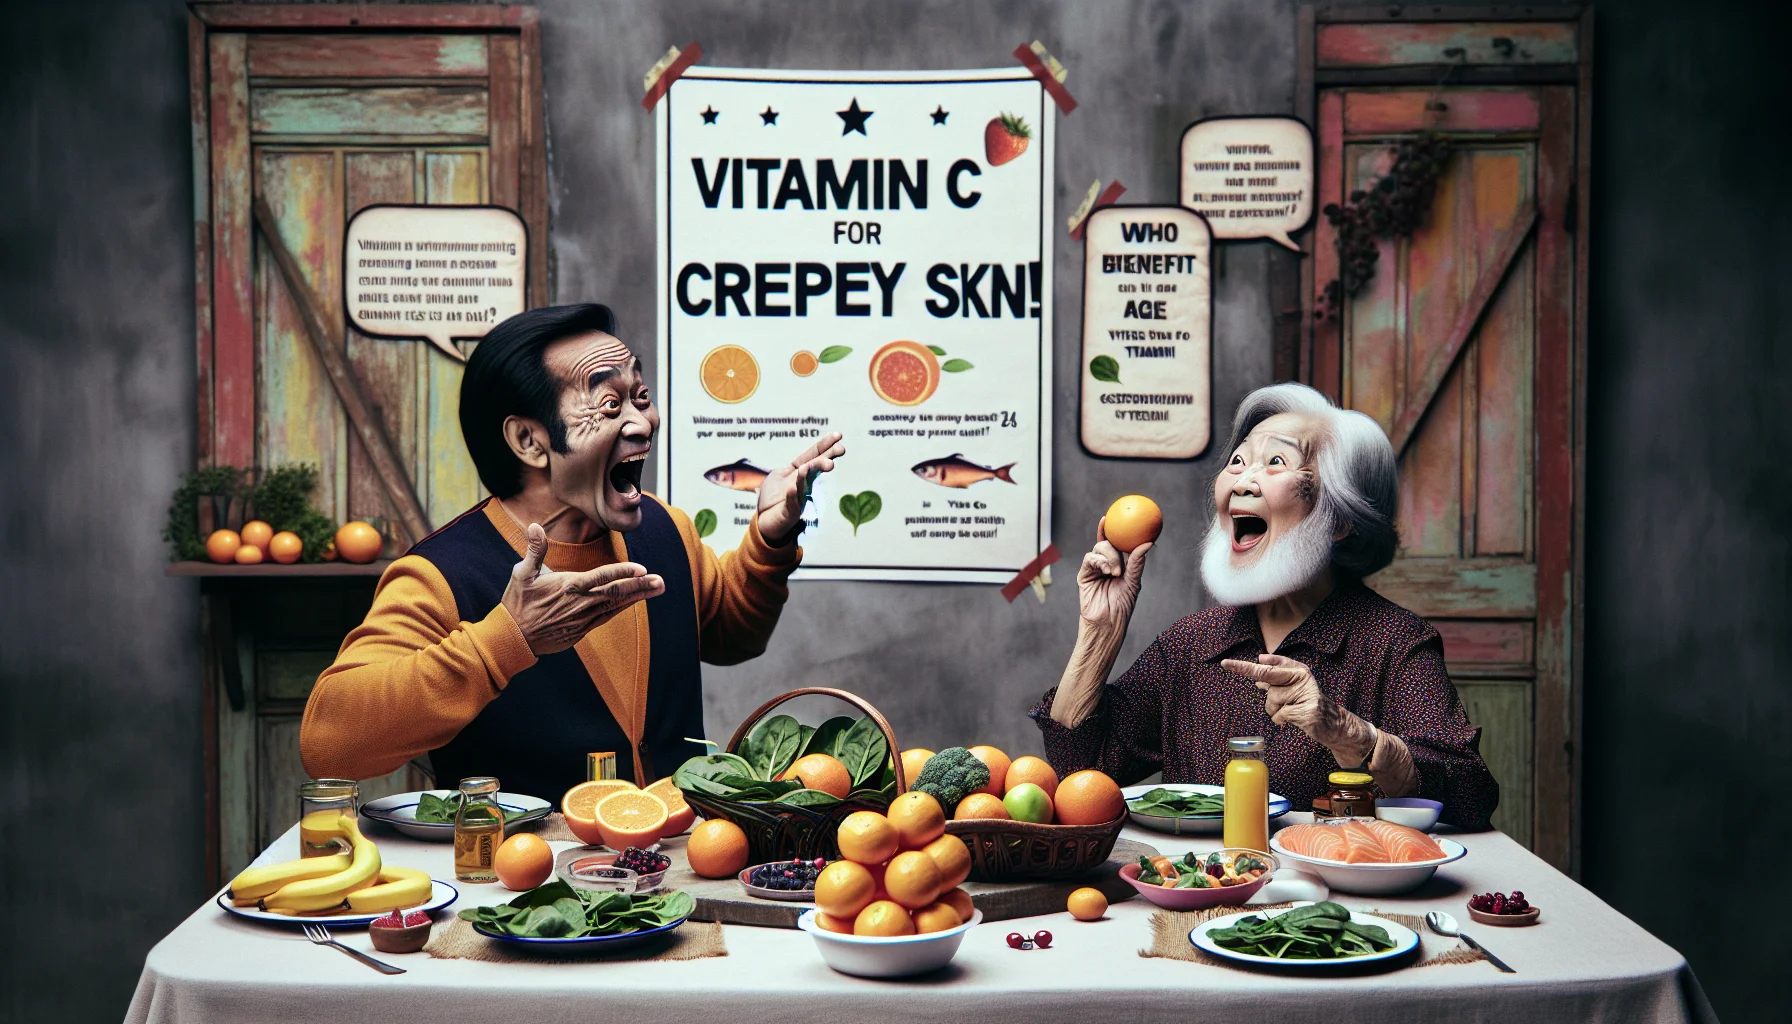 Craft a humorous yet realistic image that depicts the concept of how vitamins benefit aging skin specifically the crepey type. Showcase an elderly South Asian man and an elderly Caucasian woman humorously engaging in a healthy eating competition. They are seated across from each other at a rustic dining table laden with various vitamin-rich foods like oranges, spinach, and salmon. The man excitedly points out a poster hanging on the wall behind them that explains, in large friendly letters, 'Vitamin C for Crepey Skin!'. Their expressions should be filled with surprise and amusement as they understand the benefits of their diet.